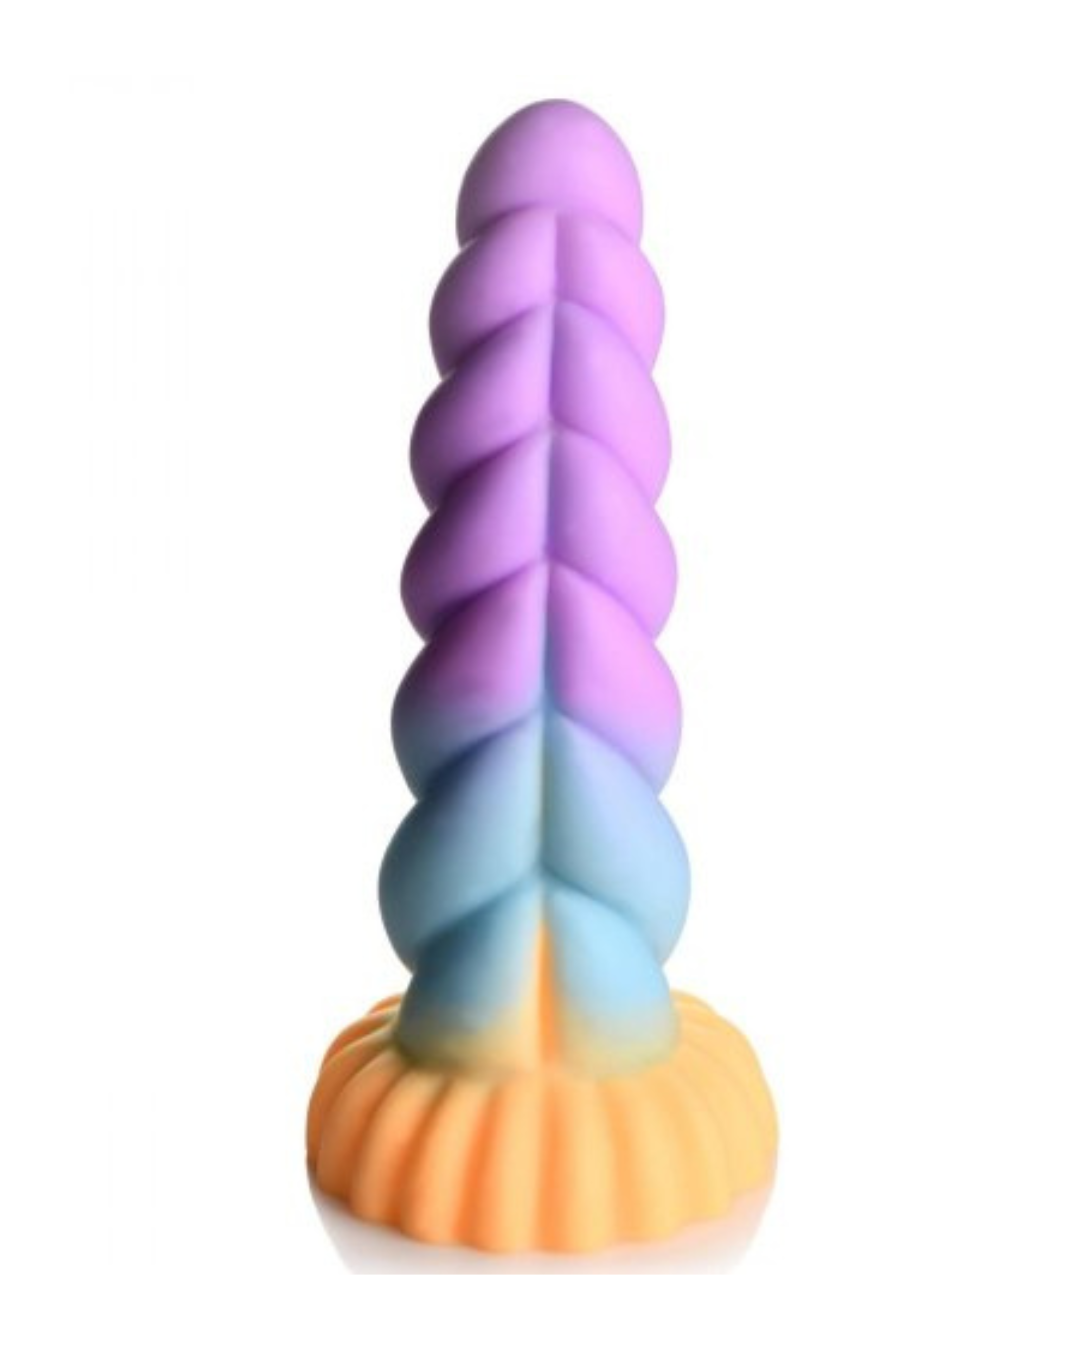 Mystique Thick 8 Inch Silicone Unicorn Dildo back view of spine  standing upwards